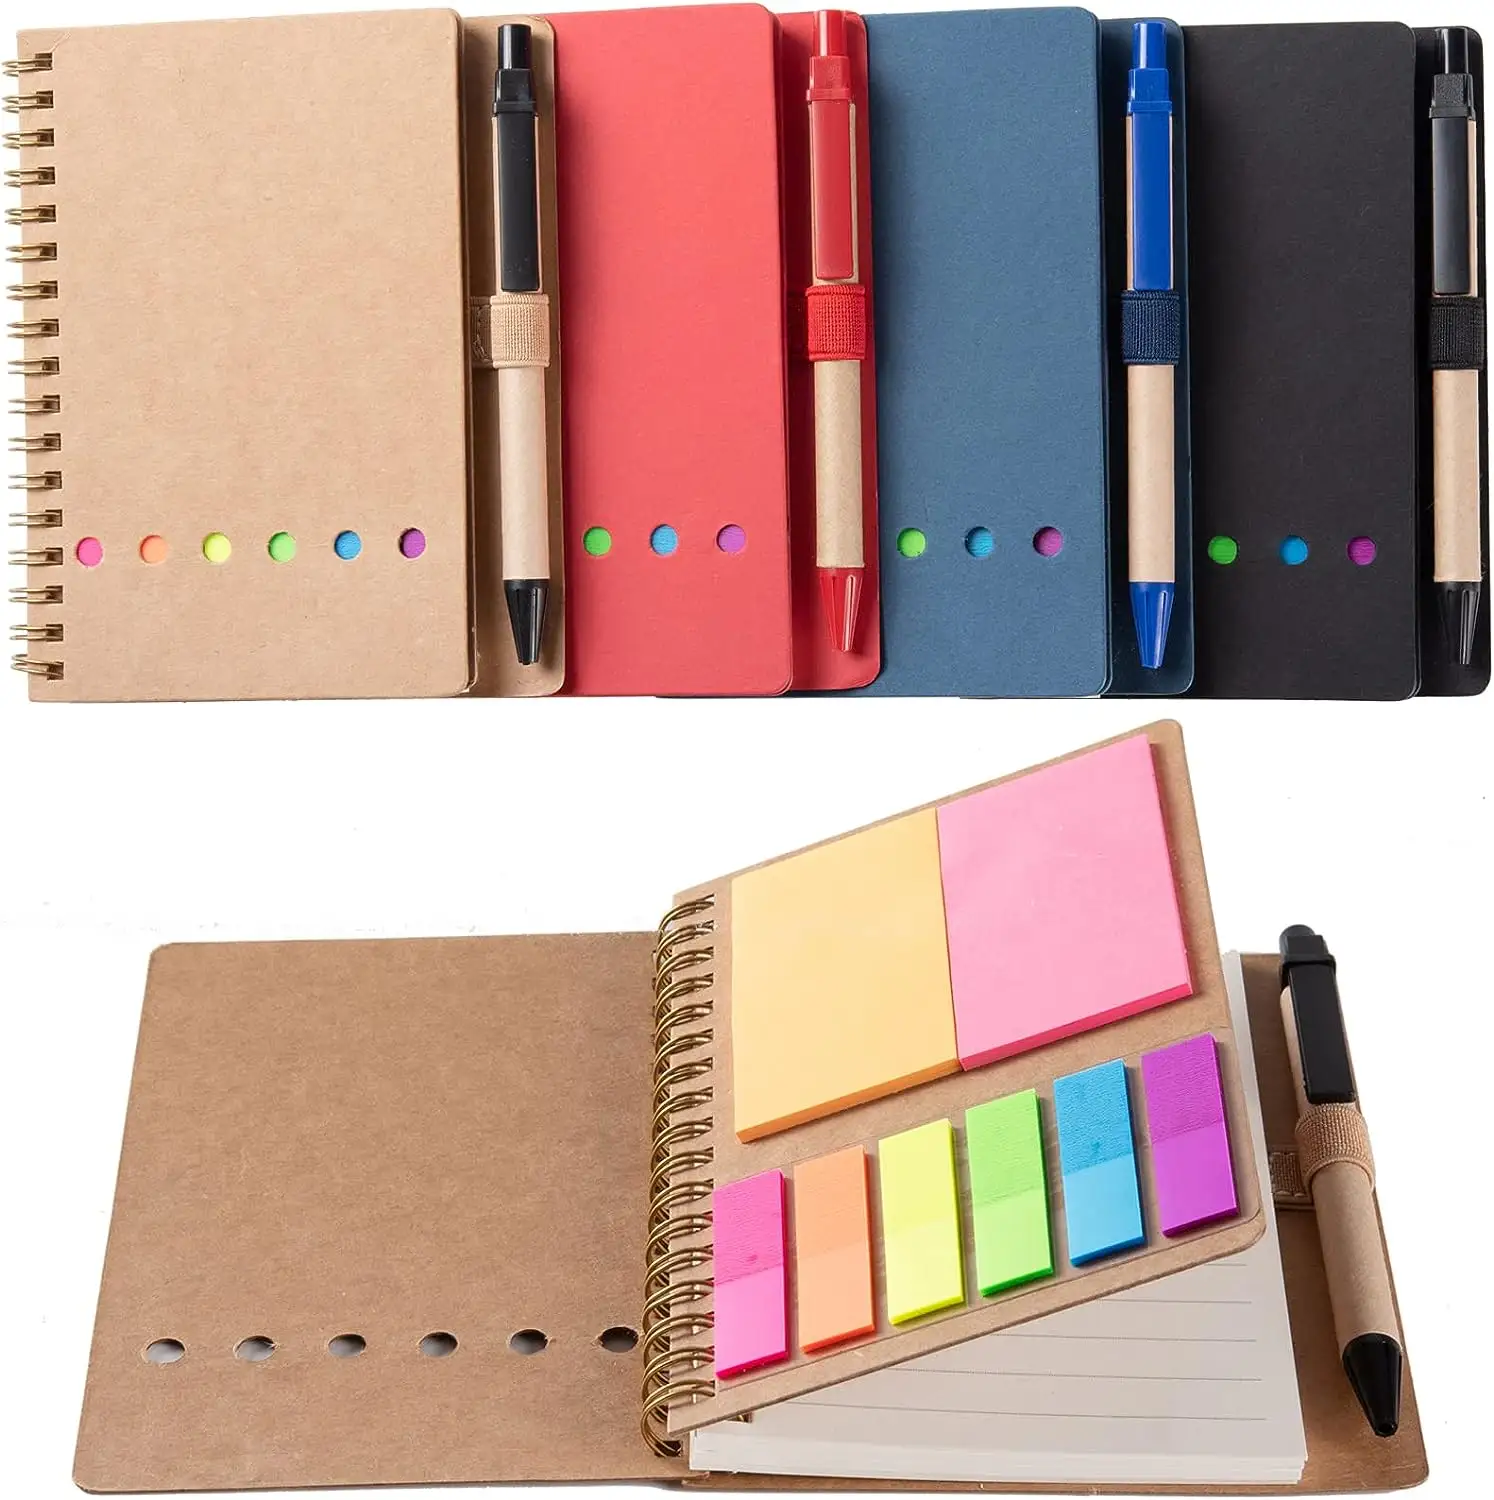 Lined Notepad with Pen in Holder, Sticky Notes, Page Marker Colored Index Tabs Flags, 4.73"x5.9" Kraft Paper Cover Small Pocket